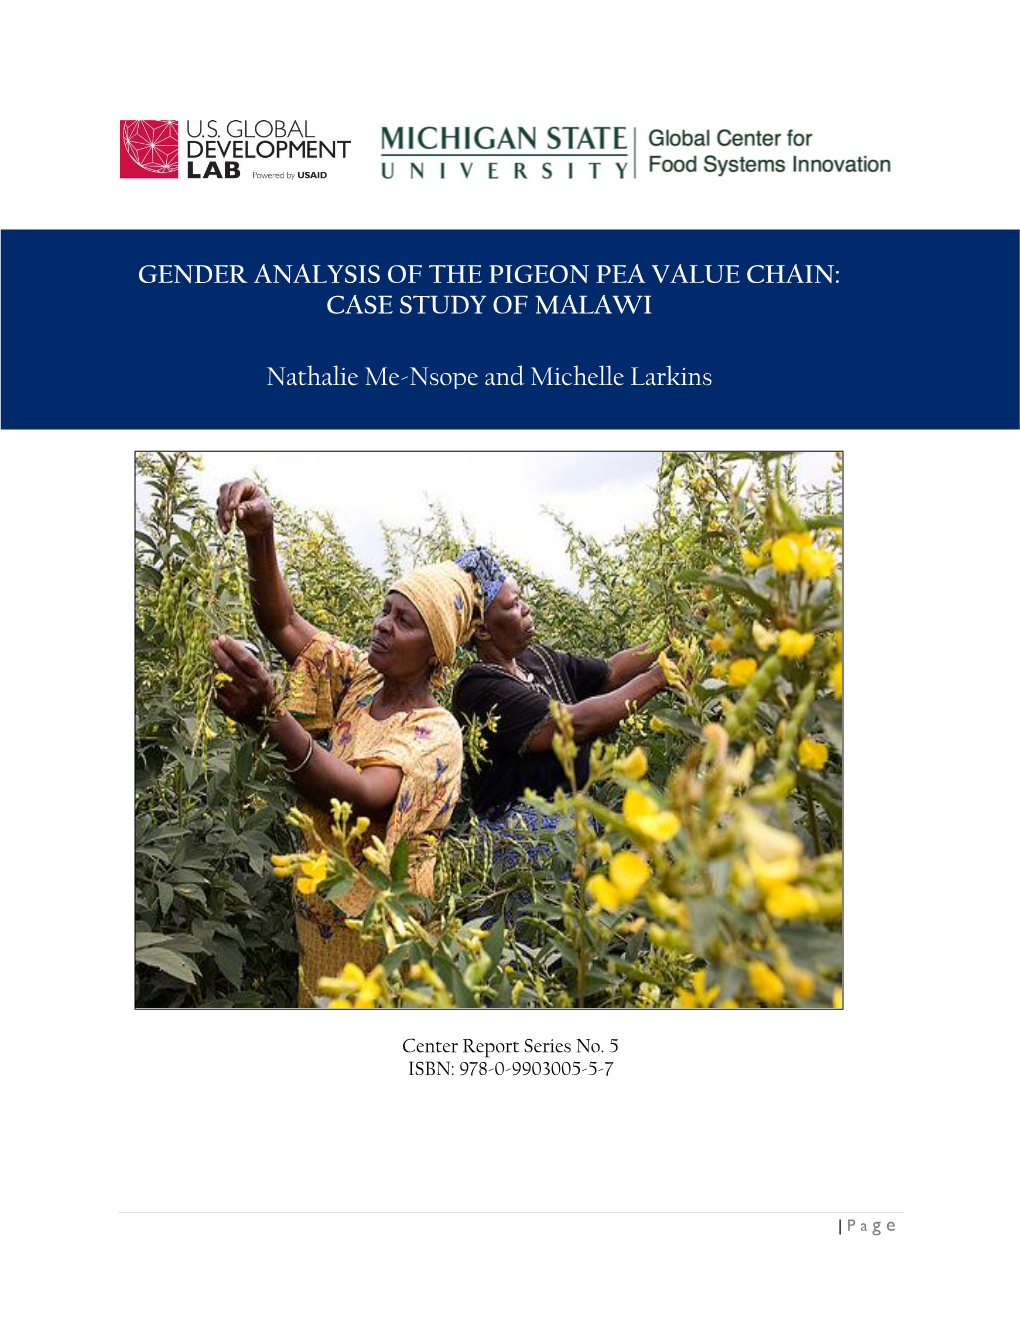 Gender Analysis of the Pigeon Pea Value Chain: Case Study of Malawi ISBN: 978-0-9903005-5-7